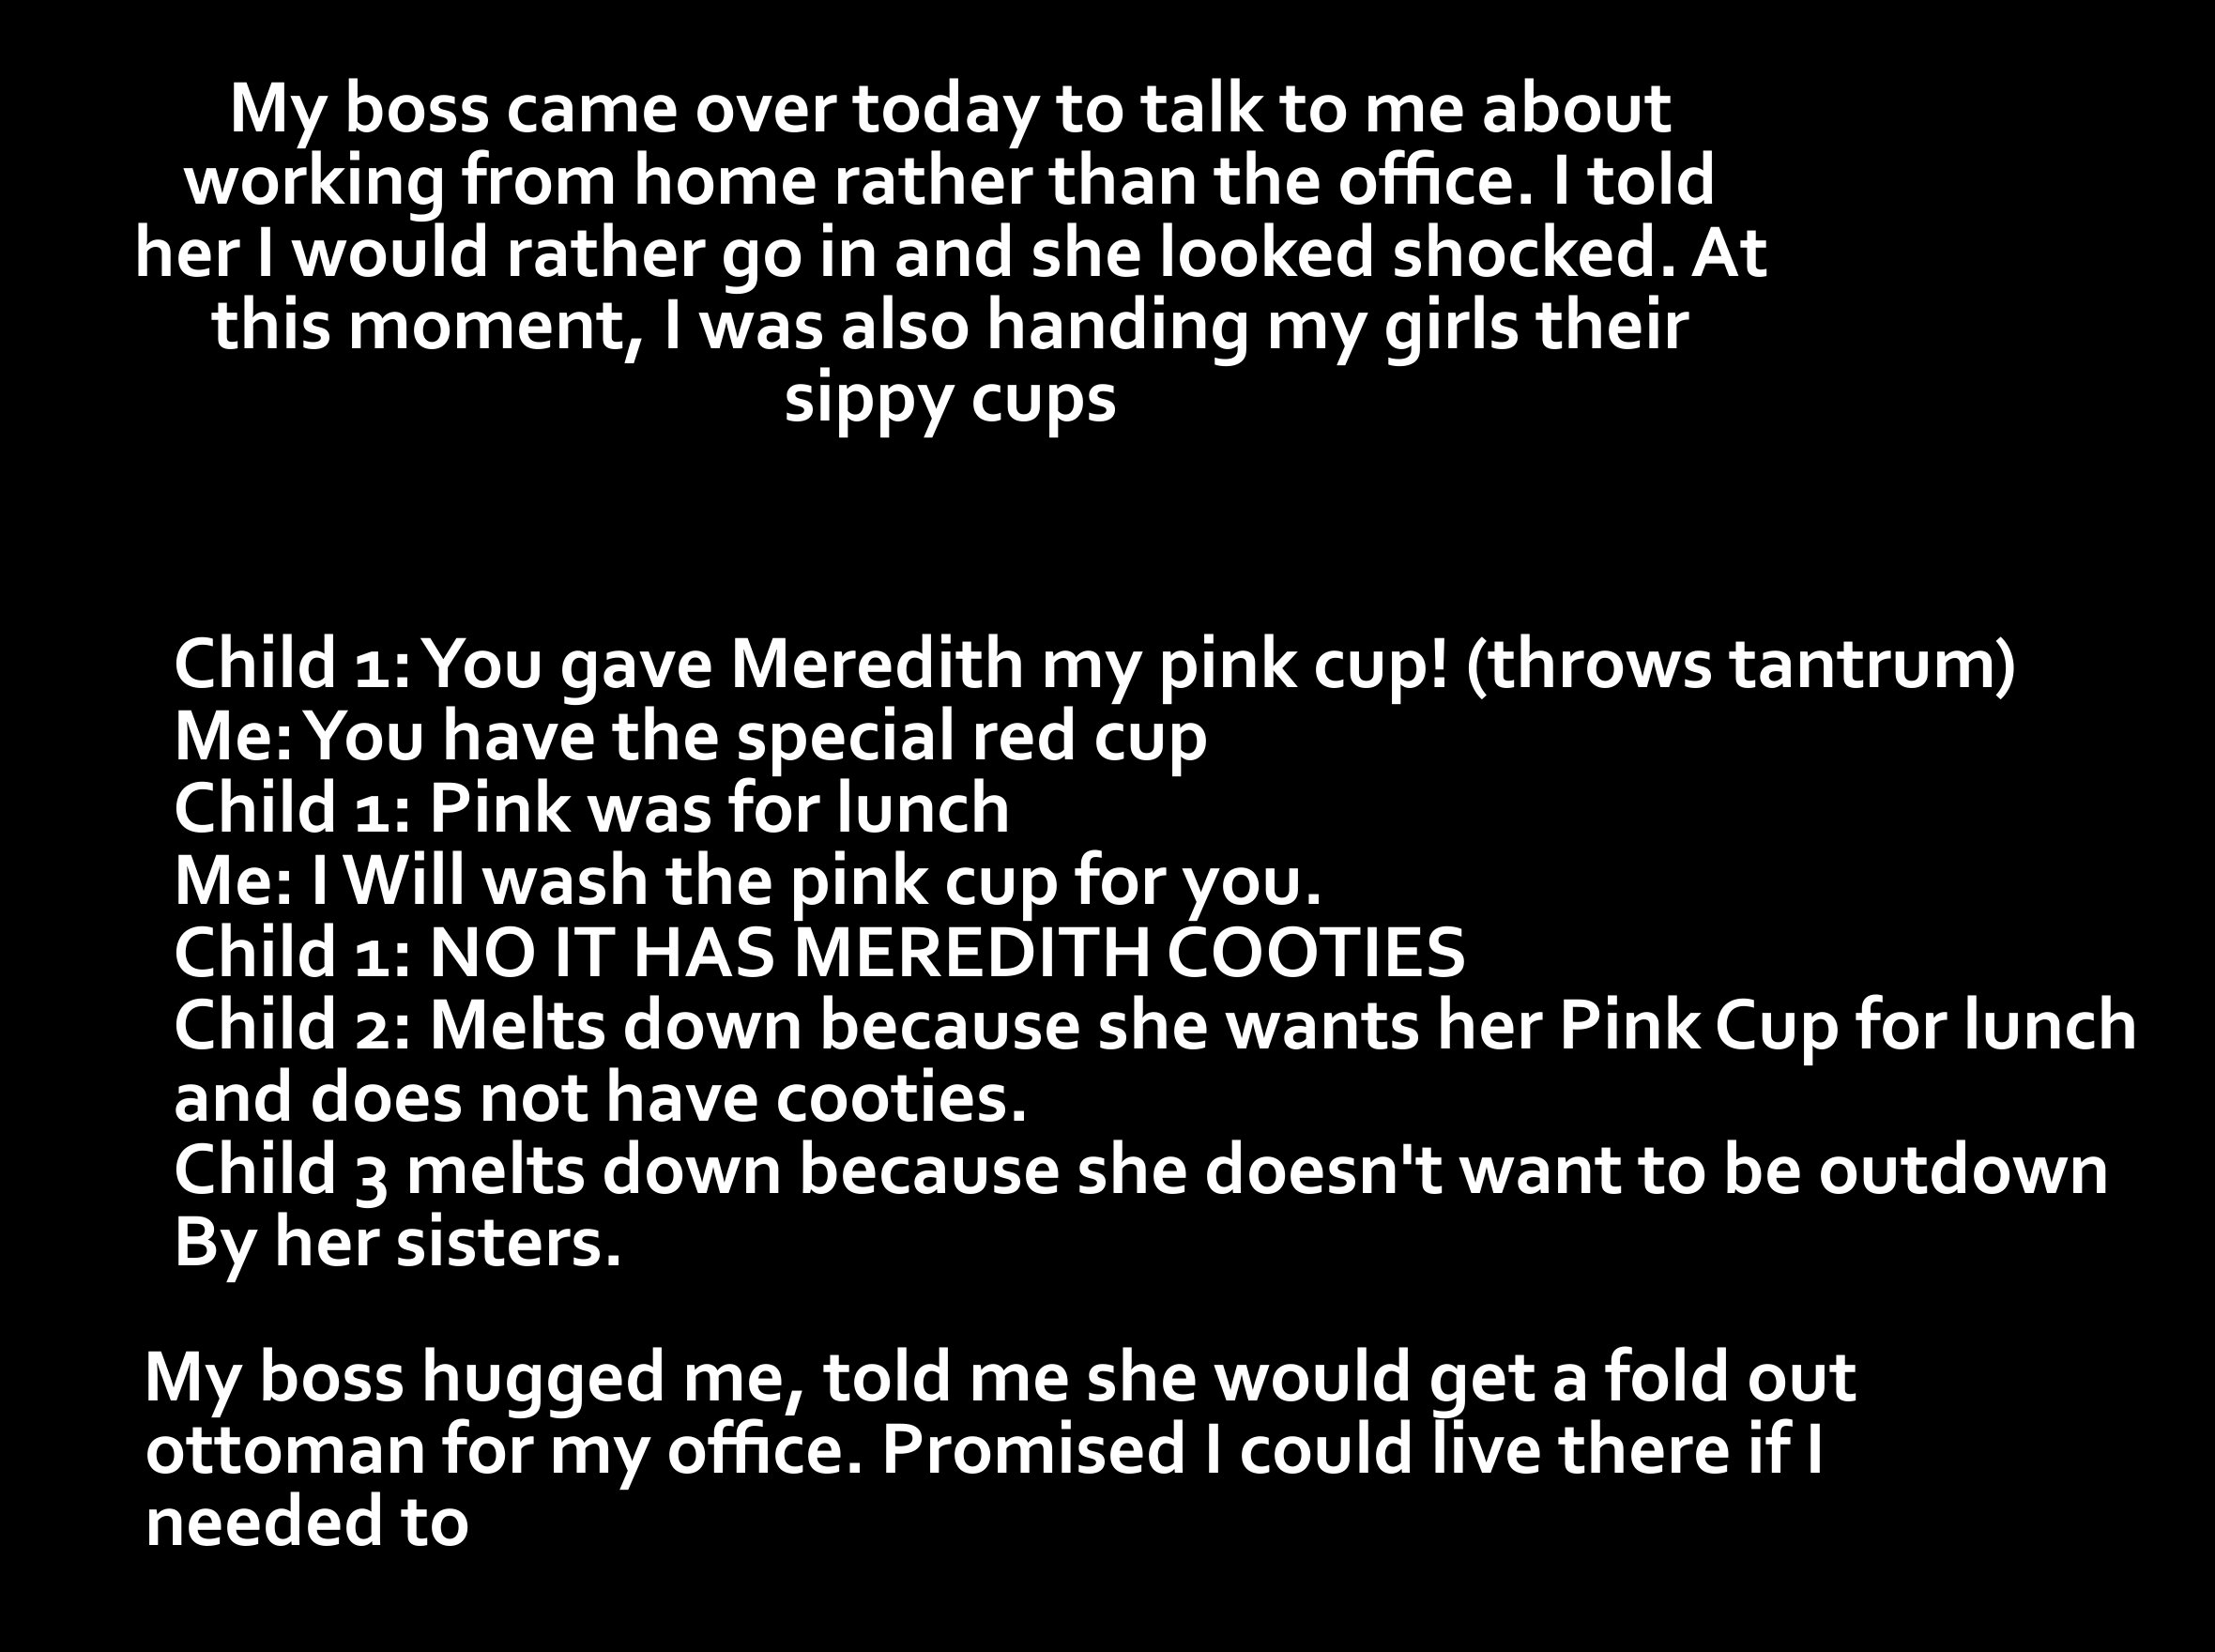 monochrome - My boss came over today to talk to me about working from home rather than the office. I told her I would rather go in and she looked shocked. At this moment, I was also handing my girls their sippy cups Child 1 You gave Meredith my pink cup! 